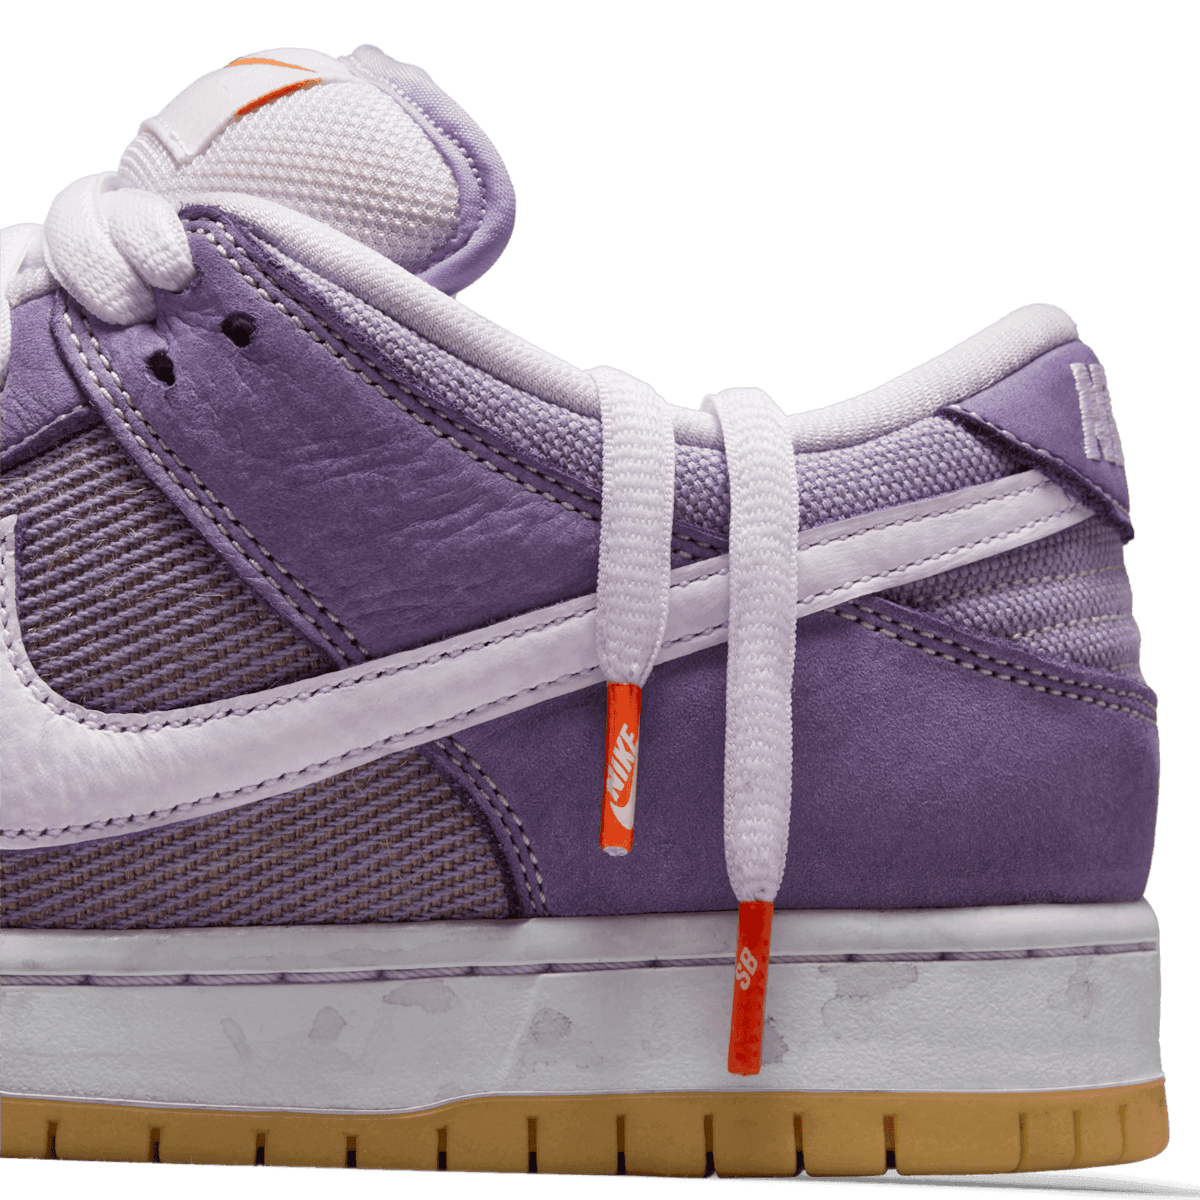 Nike SB Dunk Low Orange Label Unbleached Pack Lilac Angle 6